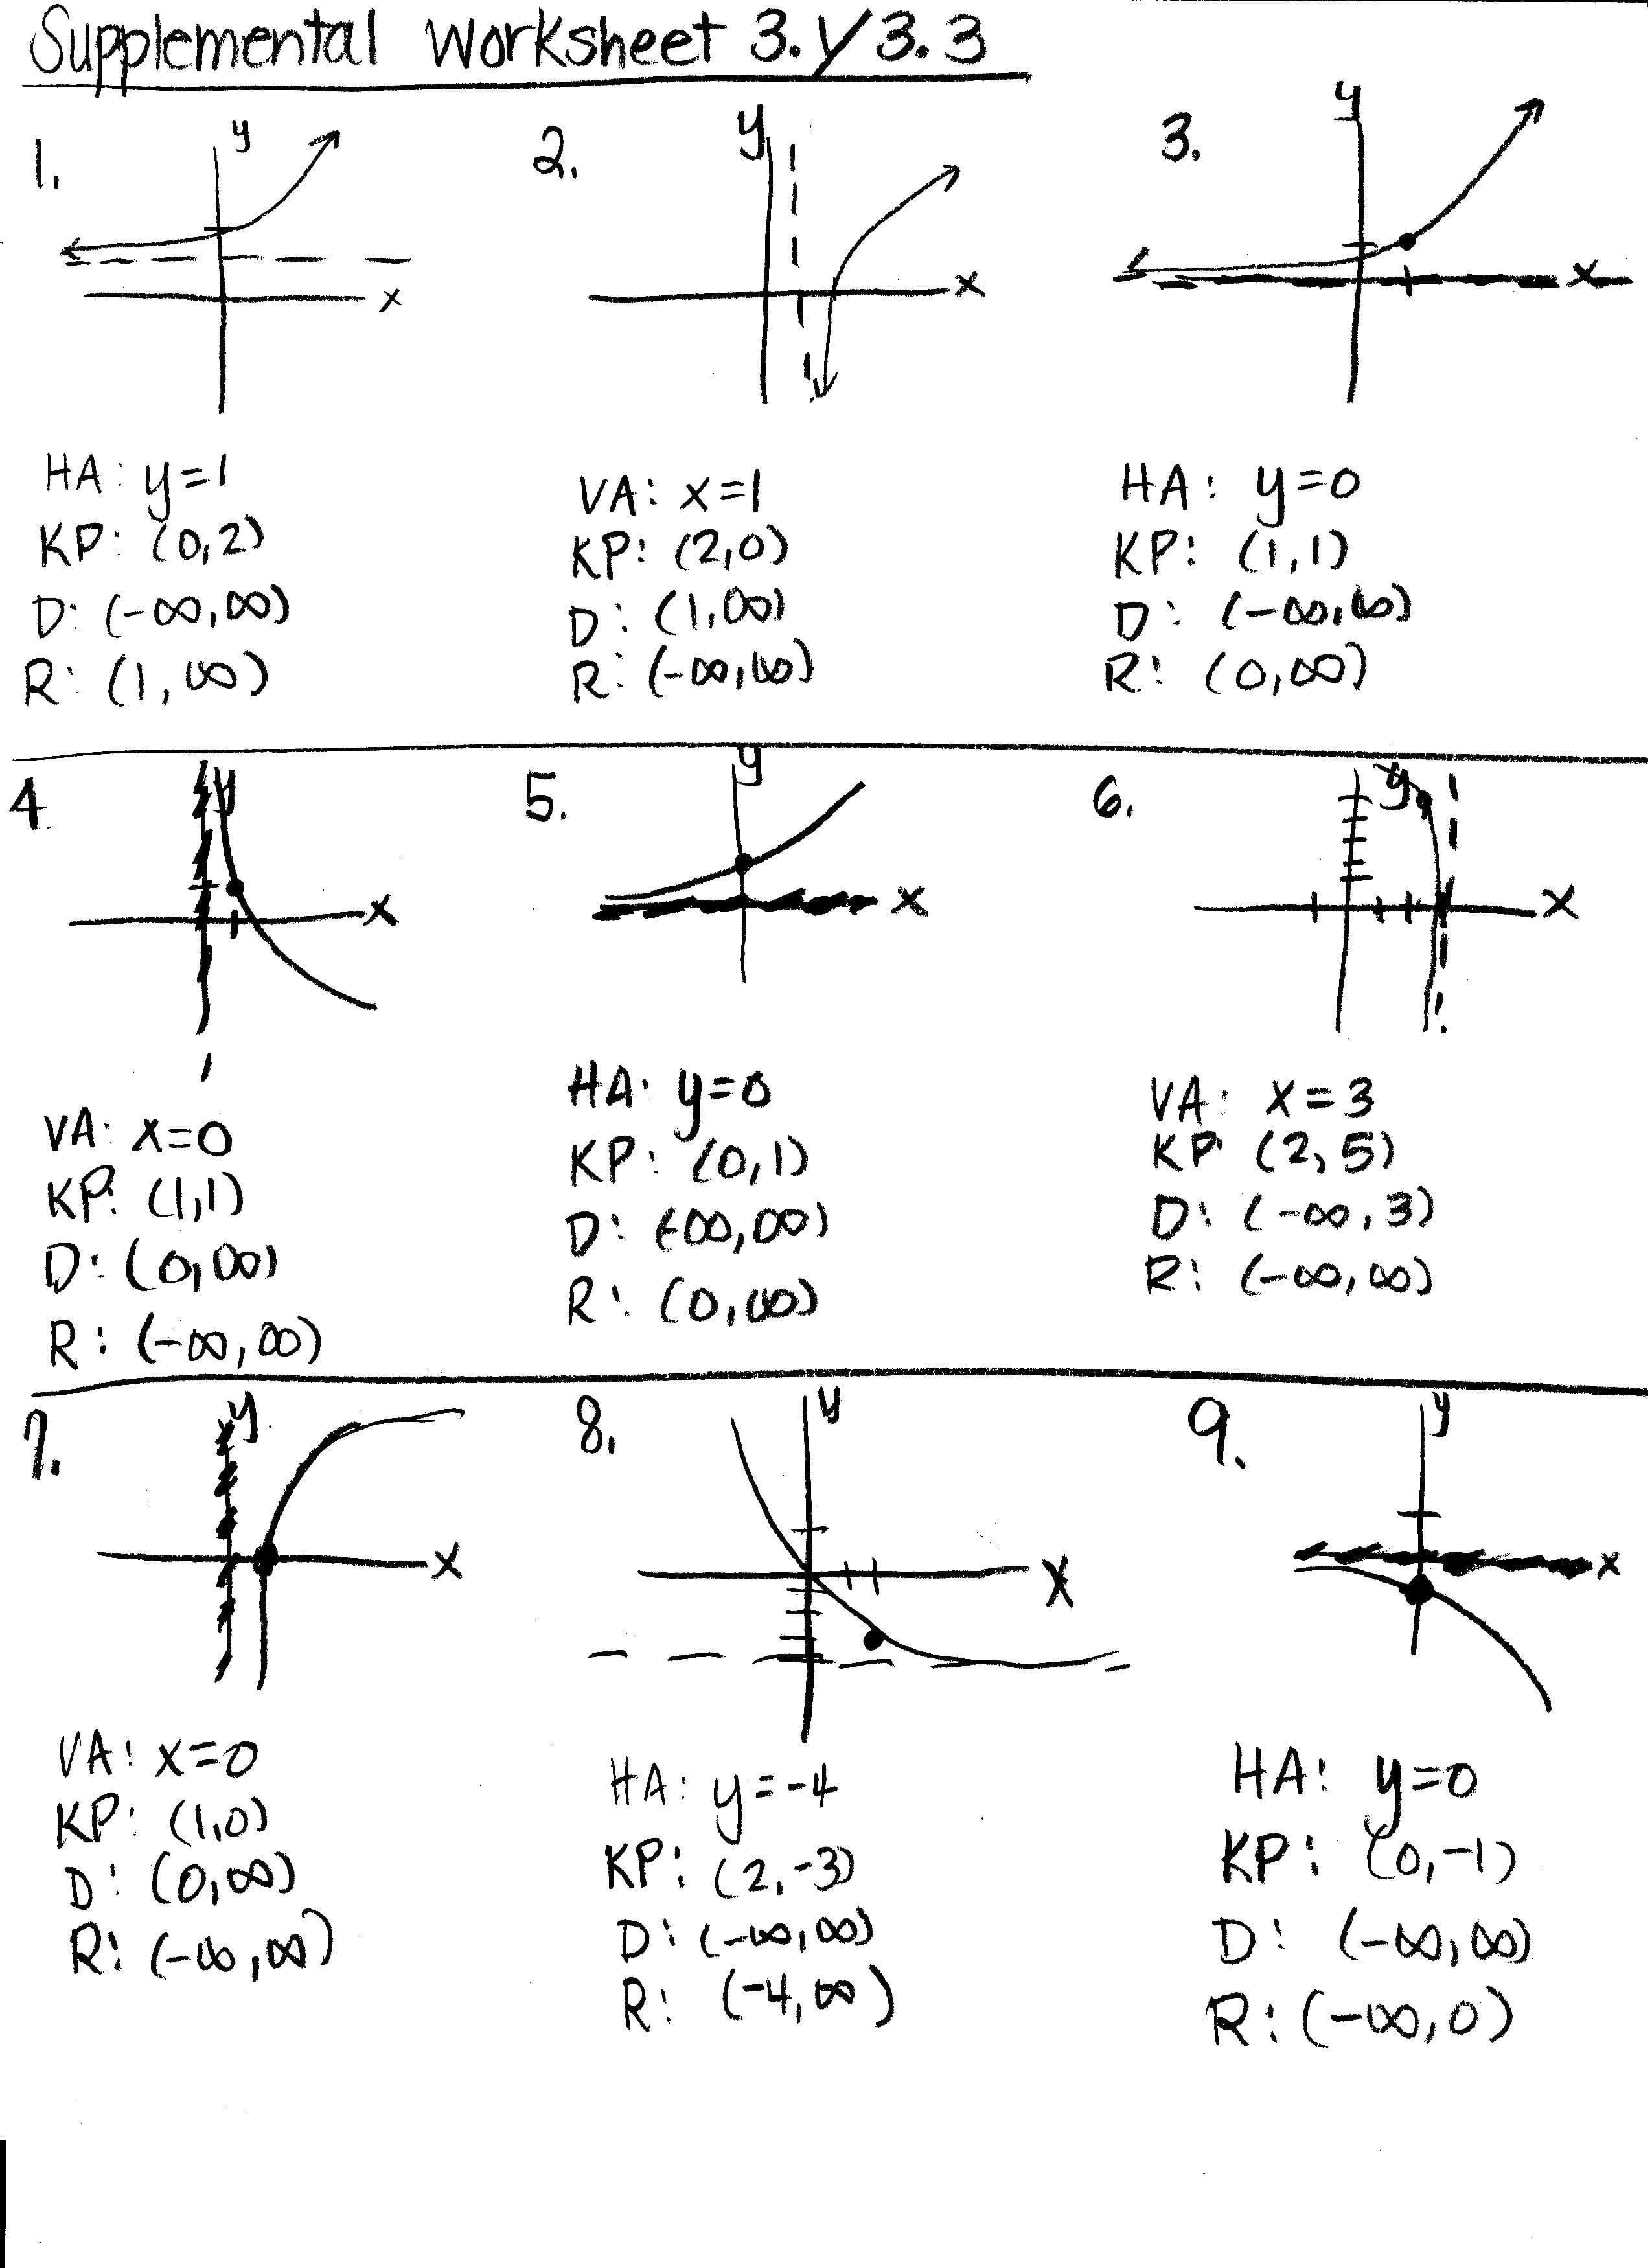 graphing-linear-equations-worksheet-650892-fresh-db-excel